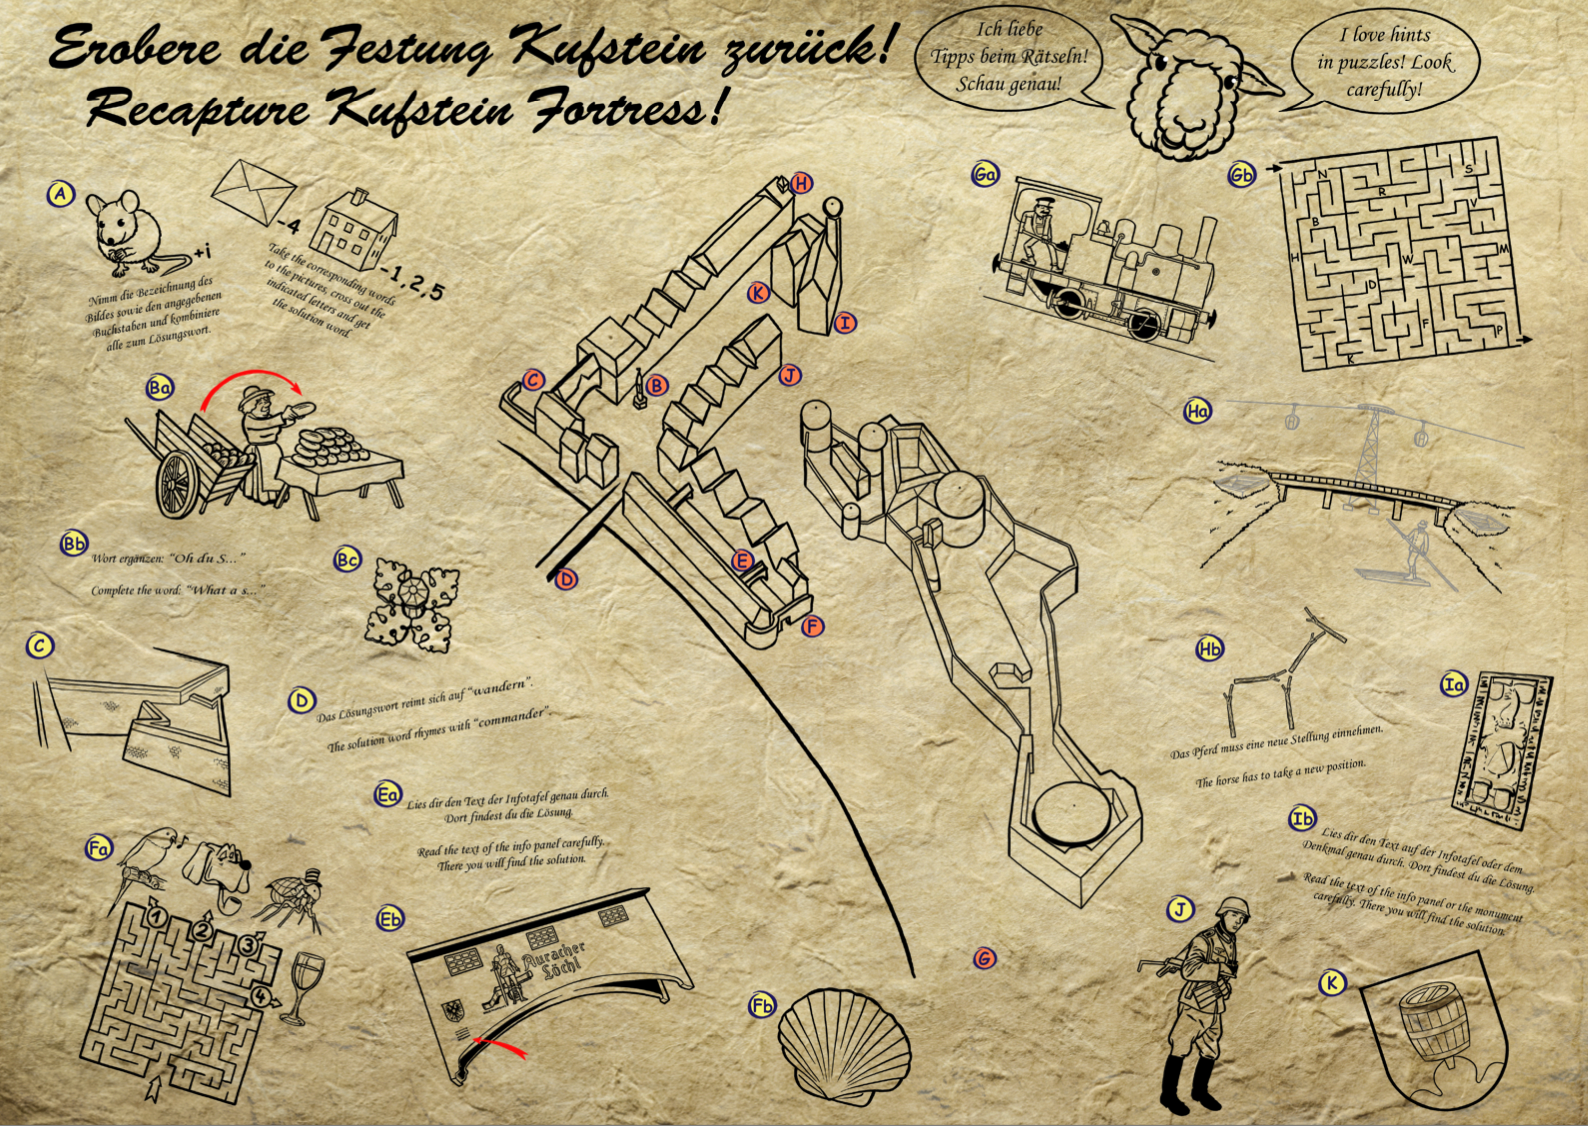 The map is needed to solve tricky tasks for the audio guide in Kufstein, which is designed as a puzzle adventure.